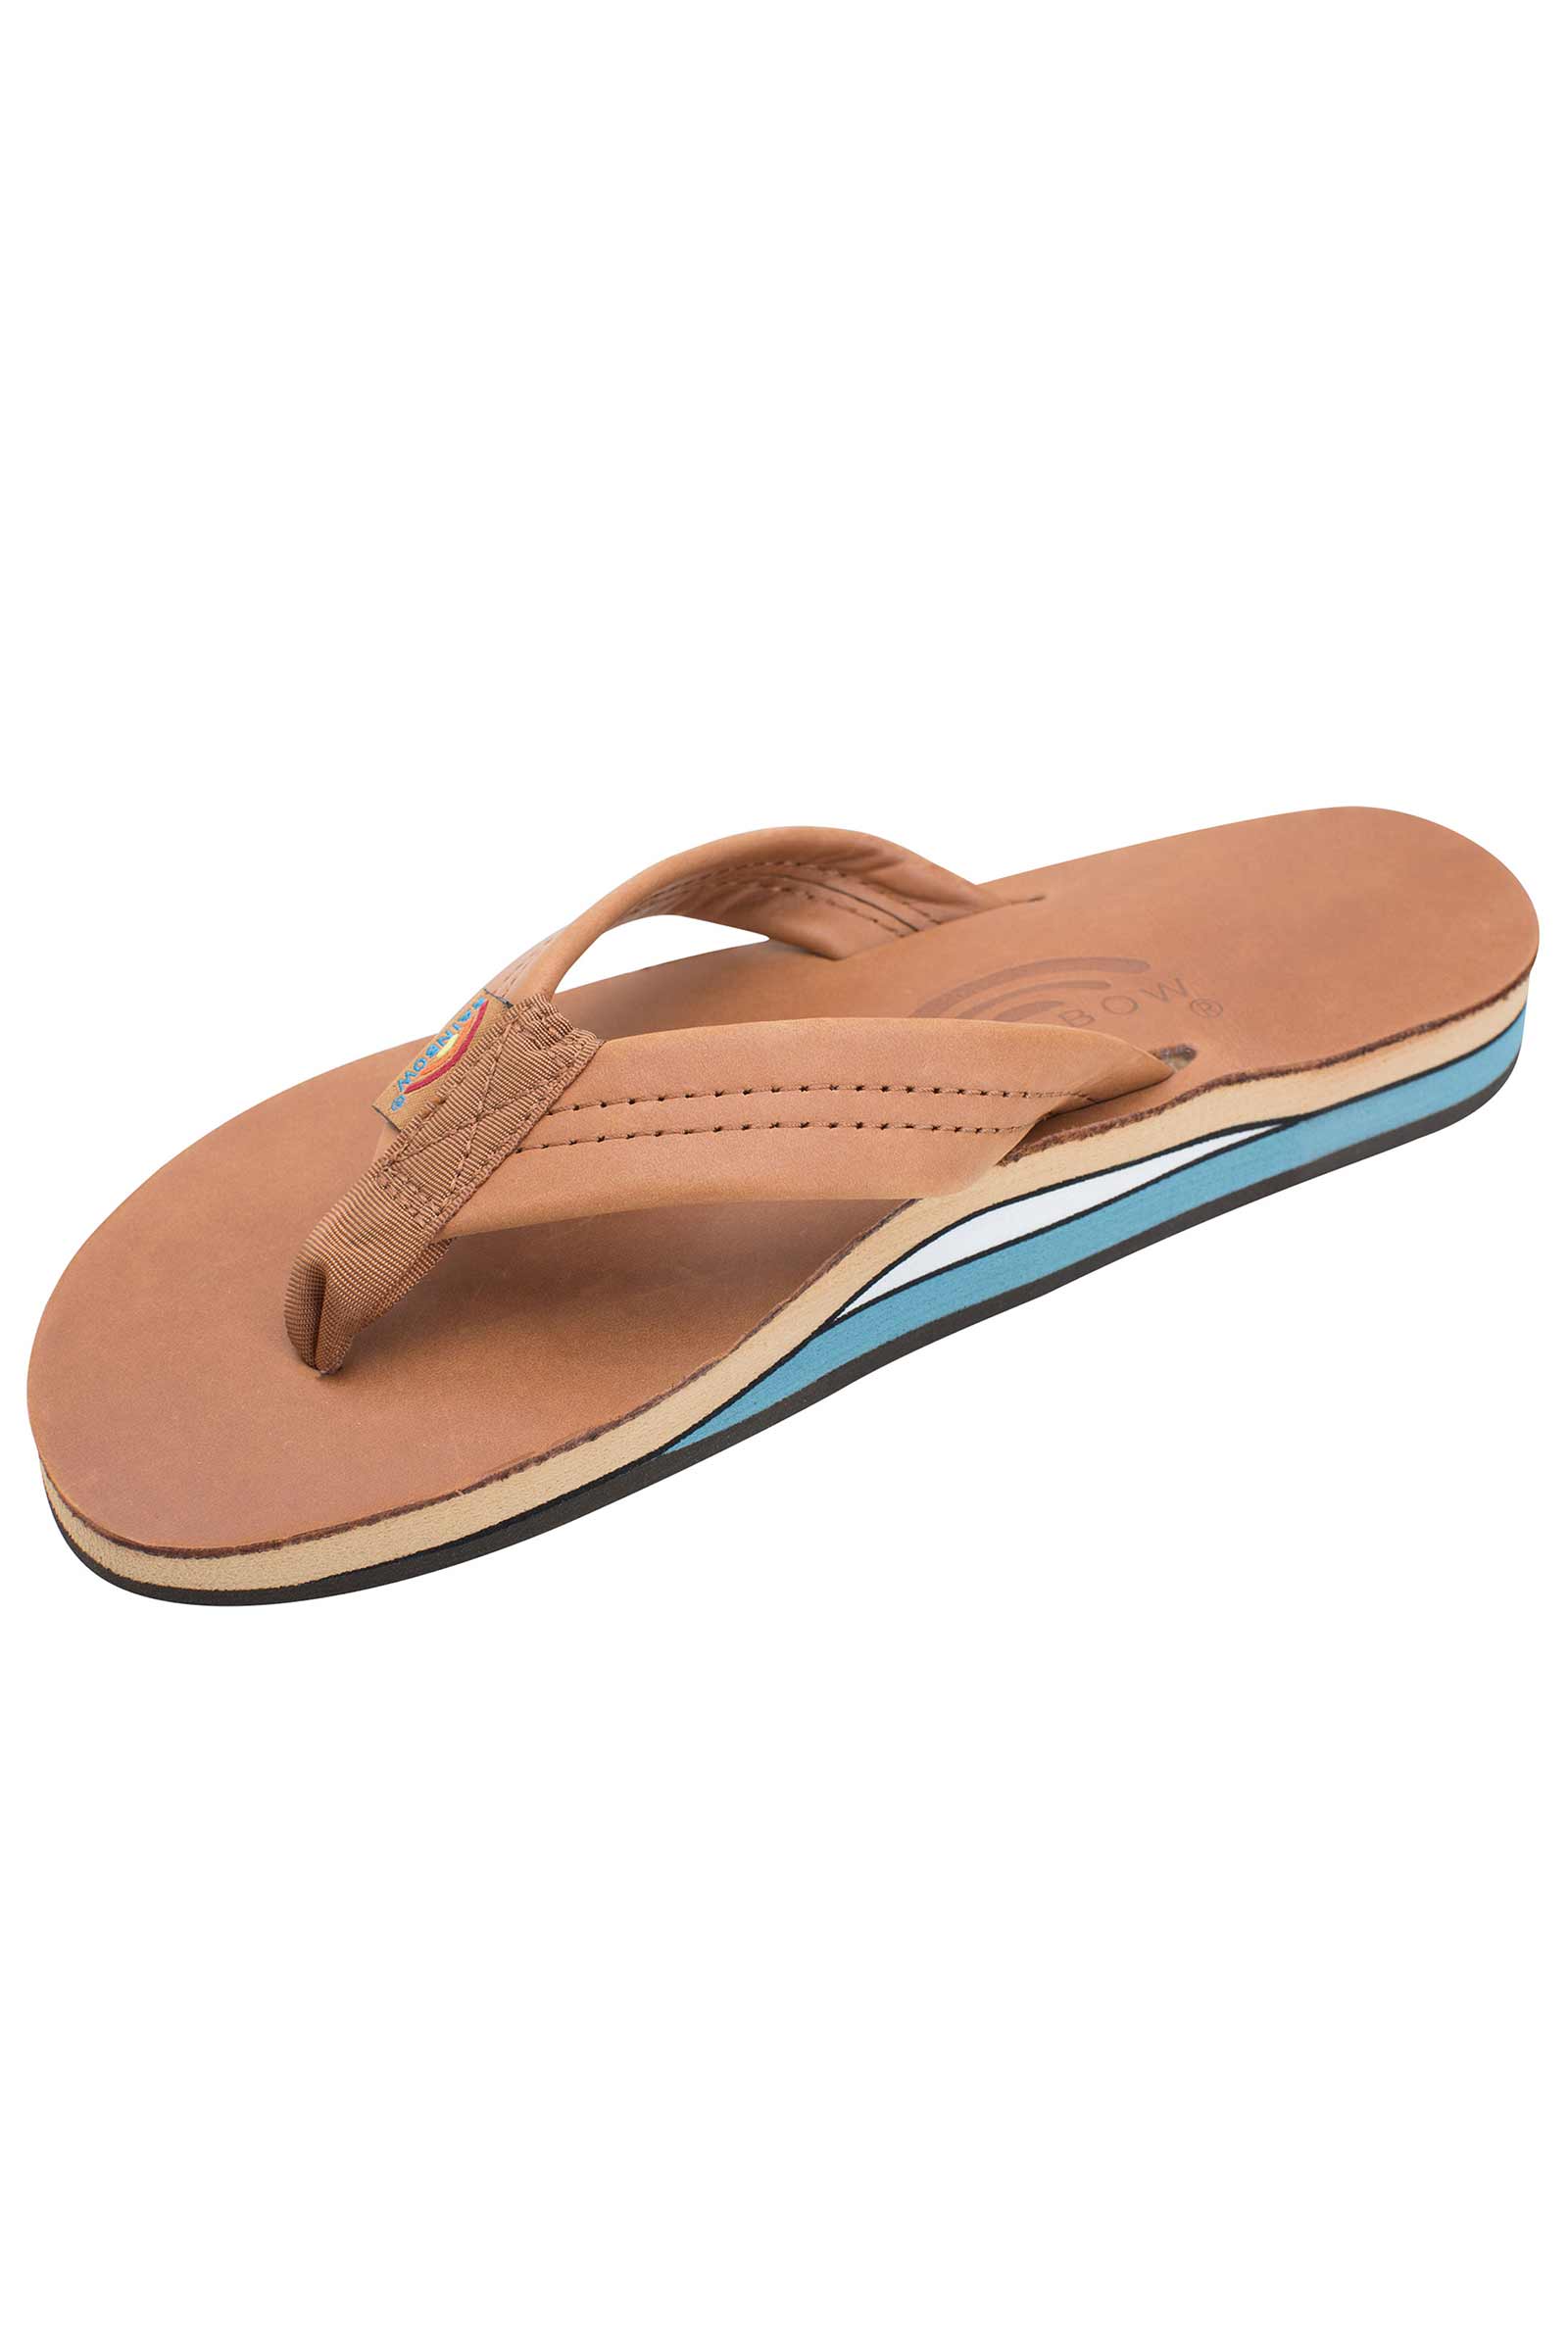 Mens Rainbow Sandals Classic Double Tan & Brown - Hope Outfitters